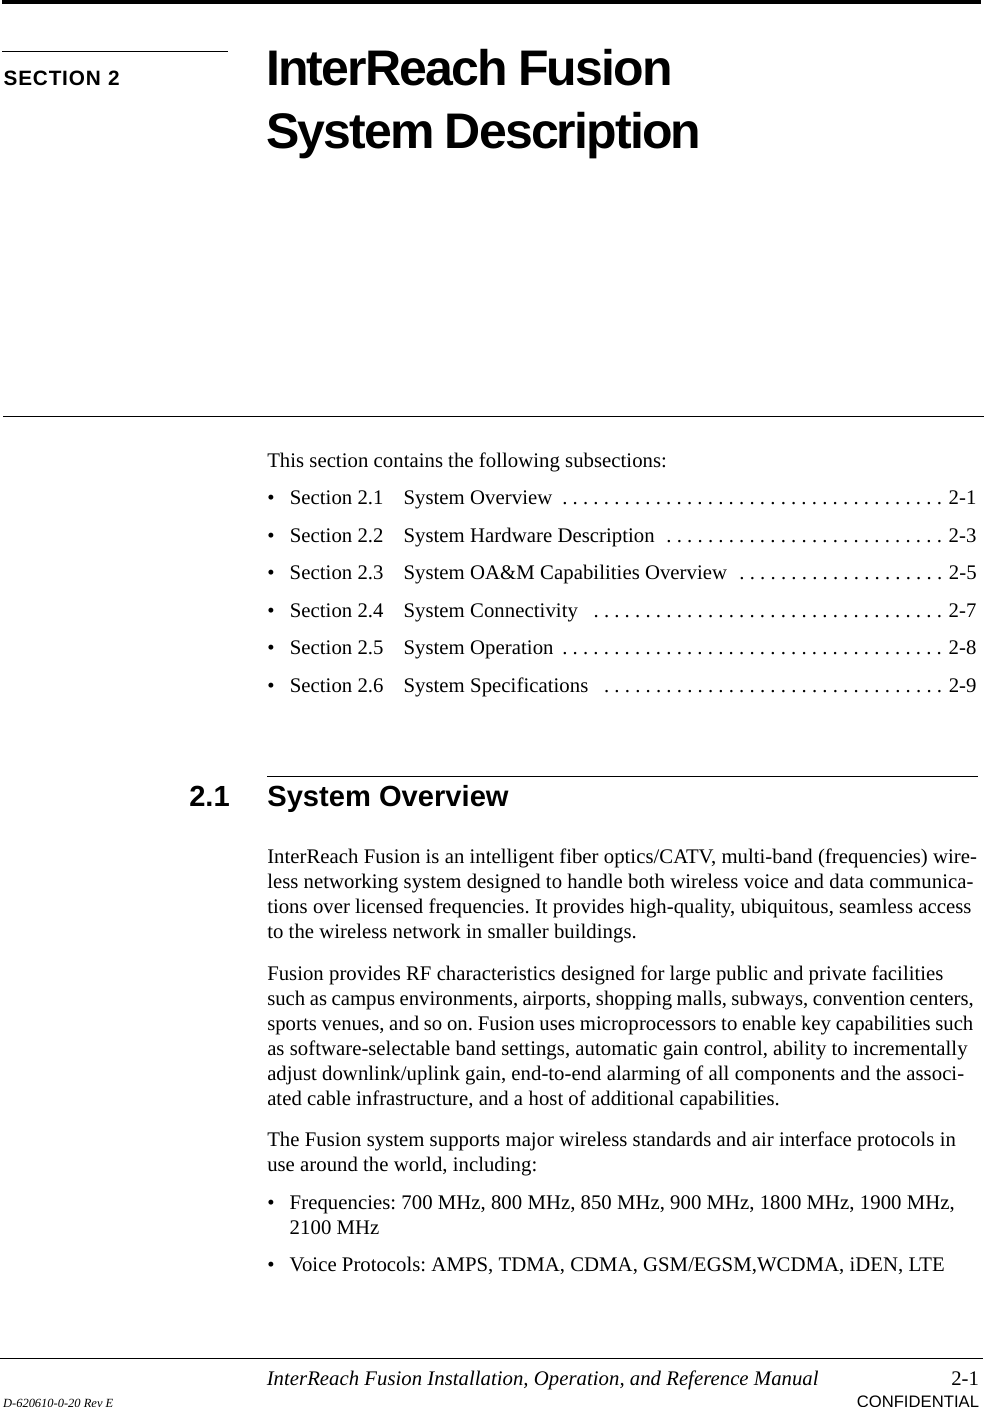 InterReach Fusion Installation, Operation, and Reference Manual 2-1D-620610-0-20 Rev E CONFIDENTIALSECTION 2 InterReach Fusion System DescriptionThis section contains the following subsections:• Section 2.1   System Overview  . . . . . . . . . . . . . . . . . . . . . . . . . . . . . . . . . . . . . 2-1• Section 2.2   System Hardware Description  . . . . . . . . . . . . . . . . . . . . . . . . . . . 2-3• Section 2.3   System OA&amp;M Capabilities Overview  . . . . . . . . . . . . . . . . . . . . 2-5• Section 2.4   System Connectivity   . . . . . . . . . . . . . . . . . . . . . . . . . . . . . . . . . . 2-7• Section 2.5   System Operation  . . . . . . . . . . . . . . . . . . . . . . . . . . . . . . . . . . . . . 2-8• Section 2.6   System Specifications   . . . . . . . . . . . . . . . . . . . . . . . . . . . . . . . . . 2-92.1 System OverviewInterReach Fusion is an intelligent fiber optics/CATV, multi-band (frequencies) wire-less networking system designed to handle both wireless voice and data communica-tions over licensed frequencies. It provides high-quality, ubiquitous, seamless access to the wireless network in smaller buildings.Fusion provides RF characteristics designed for large public and private facilities such as campus environments, airports, shopping malls, subways, convention centers, sports venues, and so on. Fusion uses microprocessors to enable key capabilities such as software-selectable band settings, automatic gain control, ability to incrementally adjust downlink/uplink gain, end-to-end alarming of all components and the associ-ated cable infrastructure, and a host of additional capabilities.The Fusion system supports major wireless standards and air interface protocols in use around the world, including:• Frequencies: 700 MHz, 800 MHz, 850 MHz, 900 MHz, 1800 MHz, 1900 MHz, 2100 MHz• Voice Protocols: AMPS, TDMA, CDMA, GSM/EGSM,WCDMA, iDEN, LTE